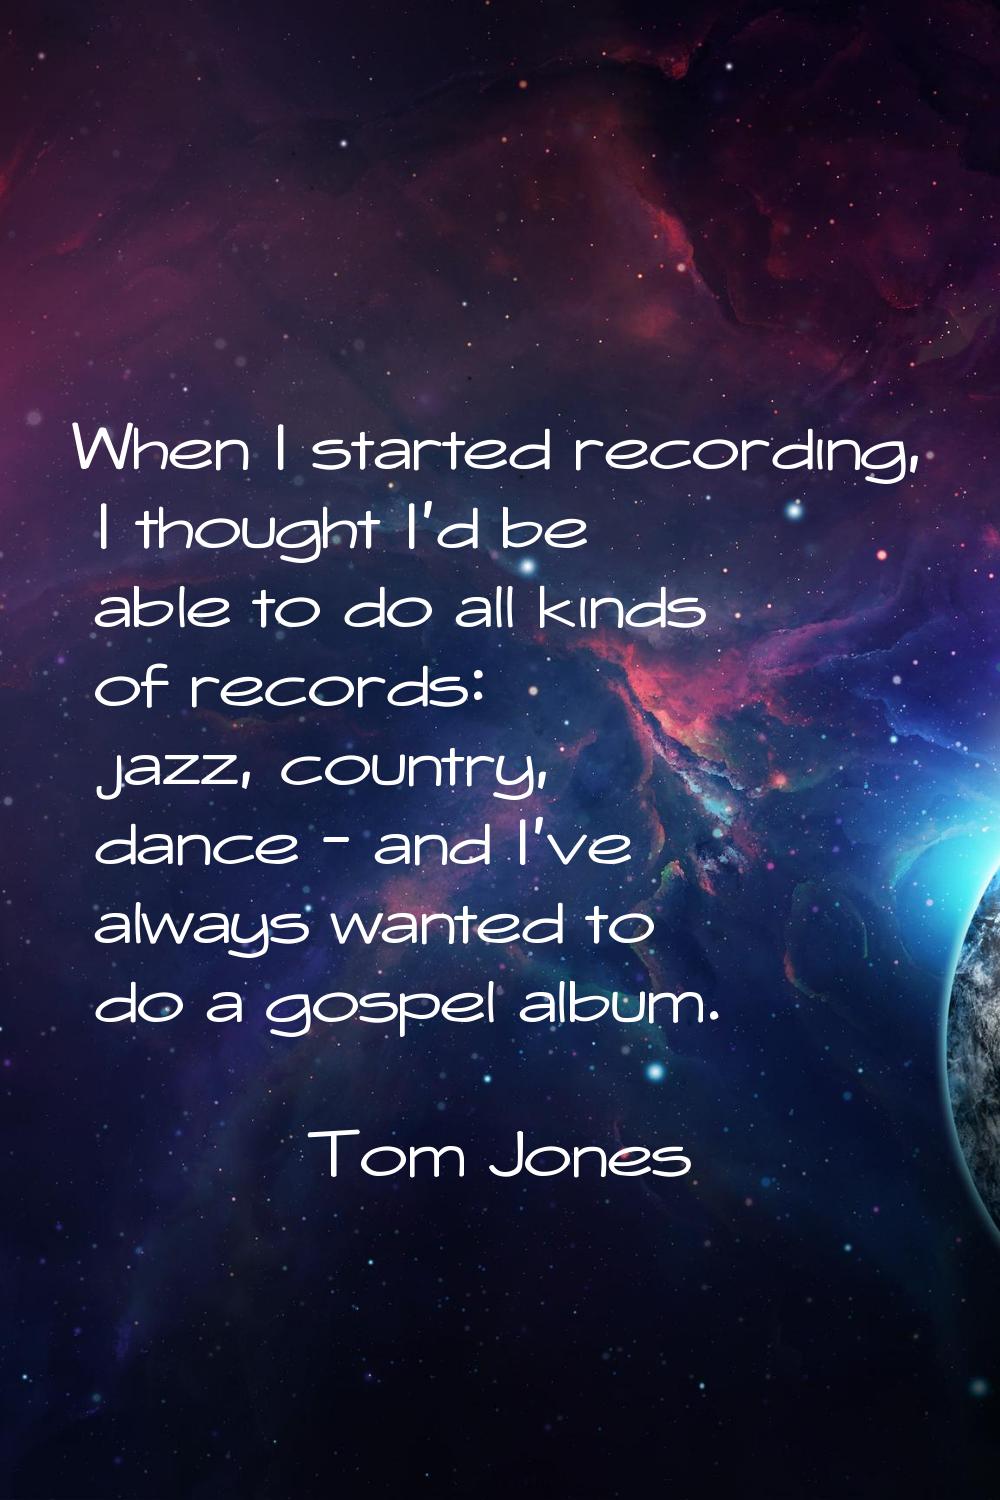 When I started recording, I thought I'd be able to do all kinds of records: jazz, country, dance - 